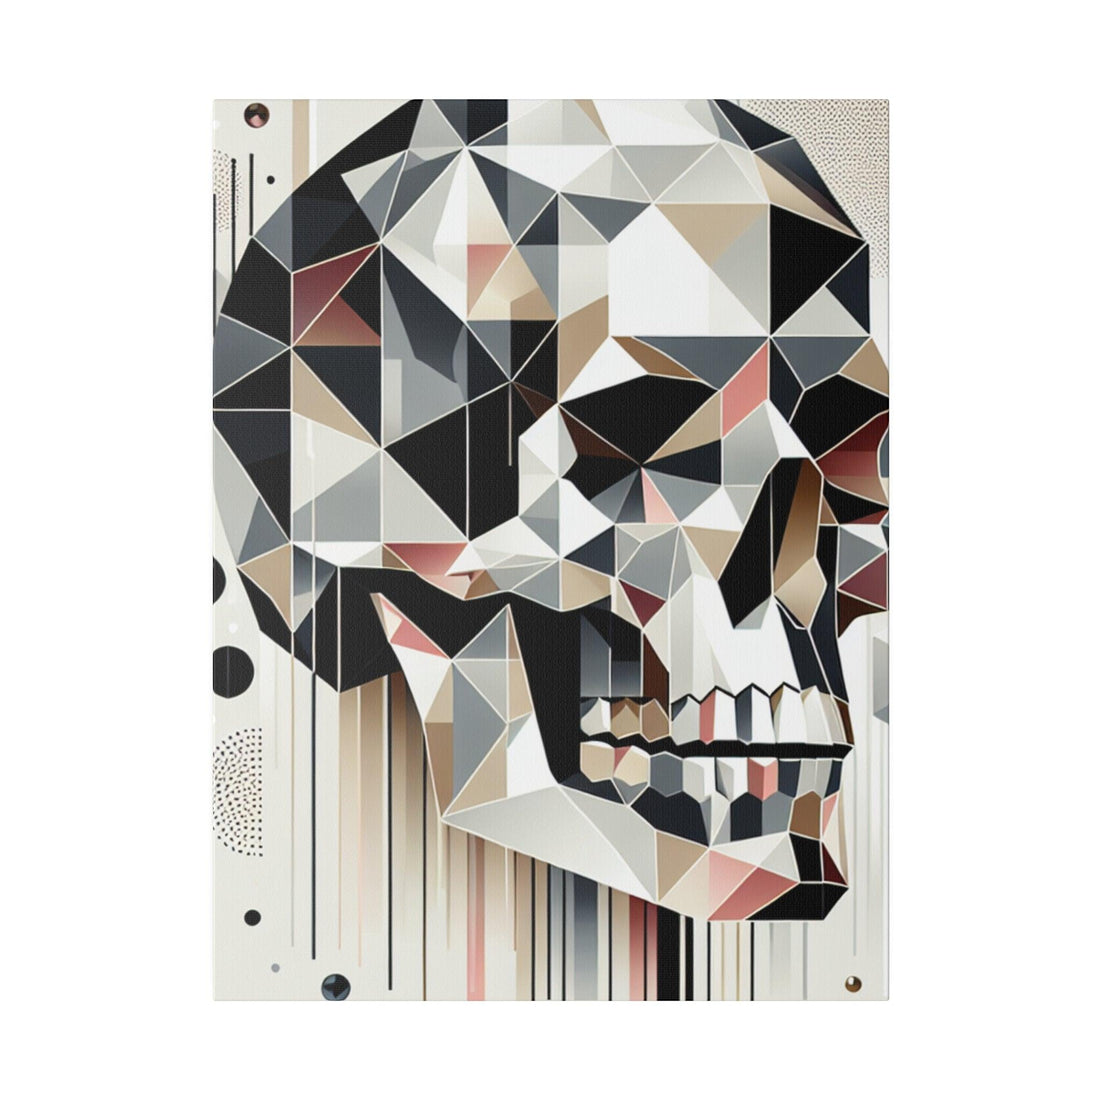 "Skull Impressions: Captivating Canvas Wall Art" - The Alice Gallery